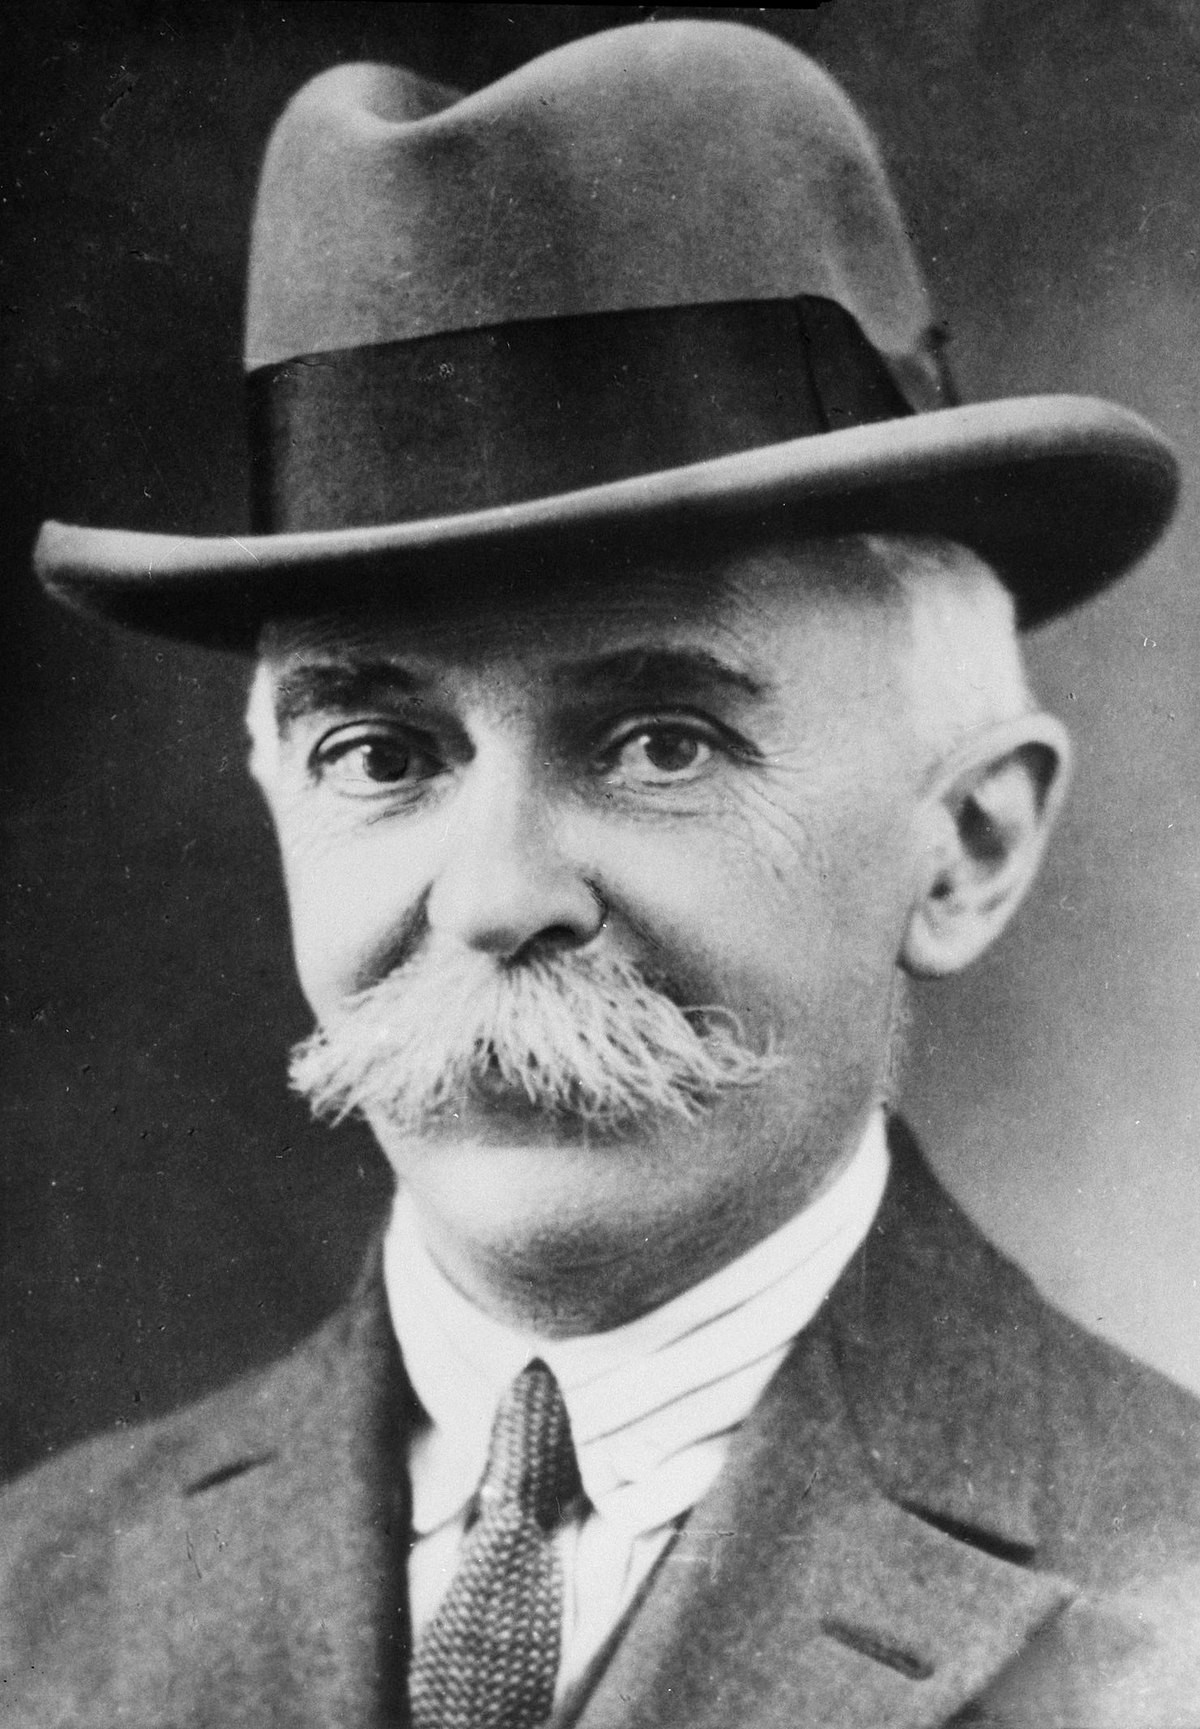 Baron Pierre de Coubertin stepped down as IOC President during World War One to serve in the French army ©Getty Images